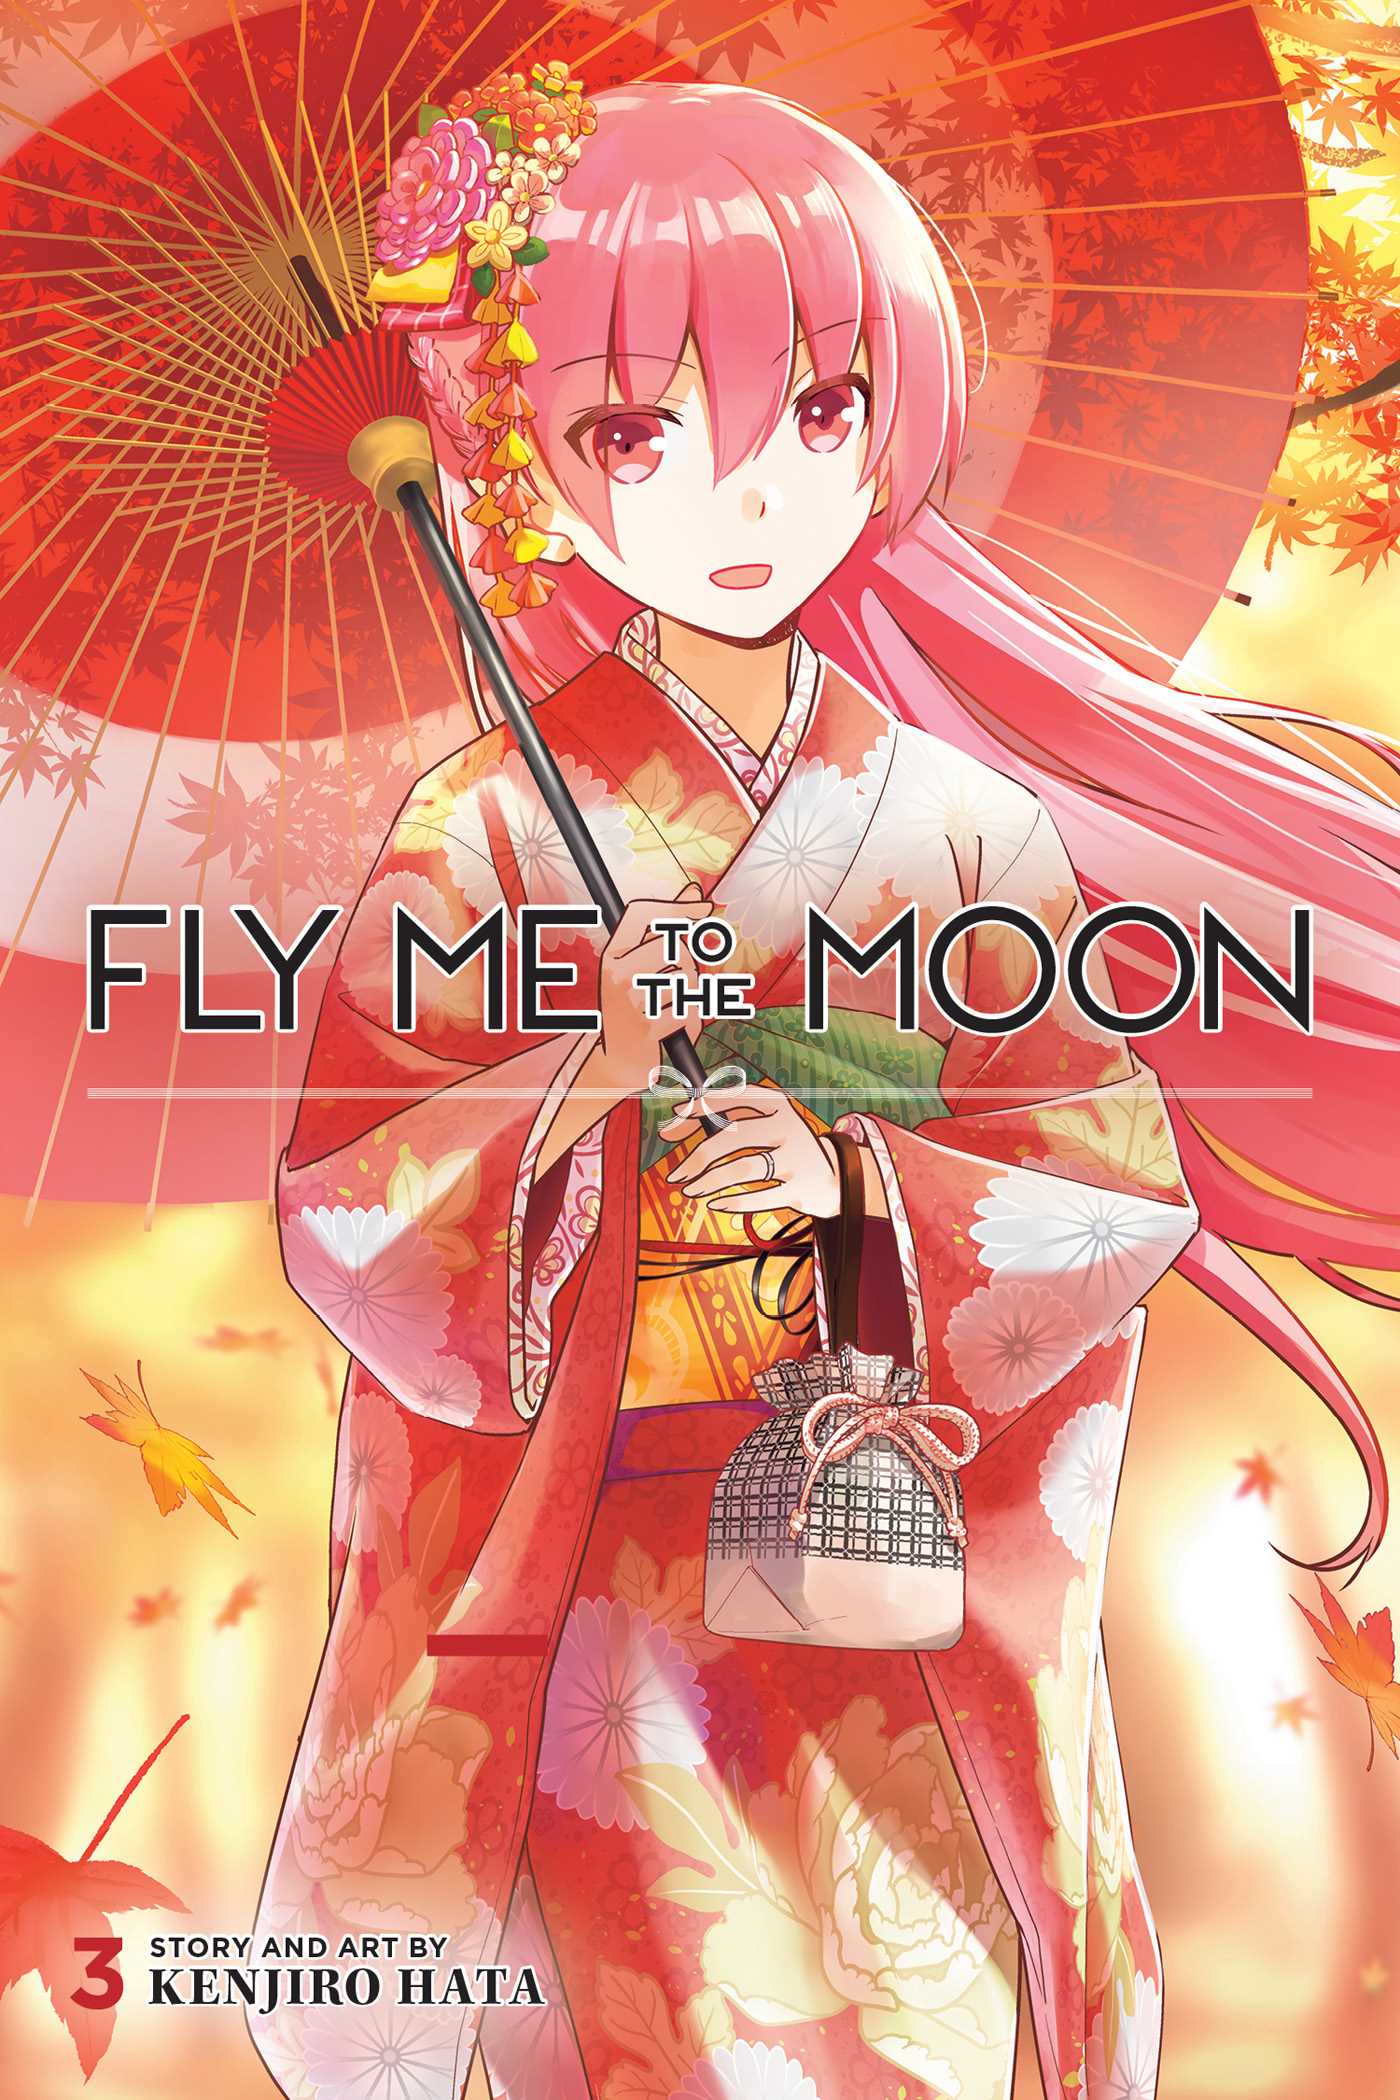 Fly Me to the Moon, Vol. 3. Book by Kenjiro Hata. Official Publisher Page. Simon & Schuster